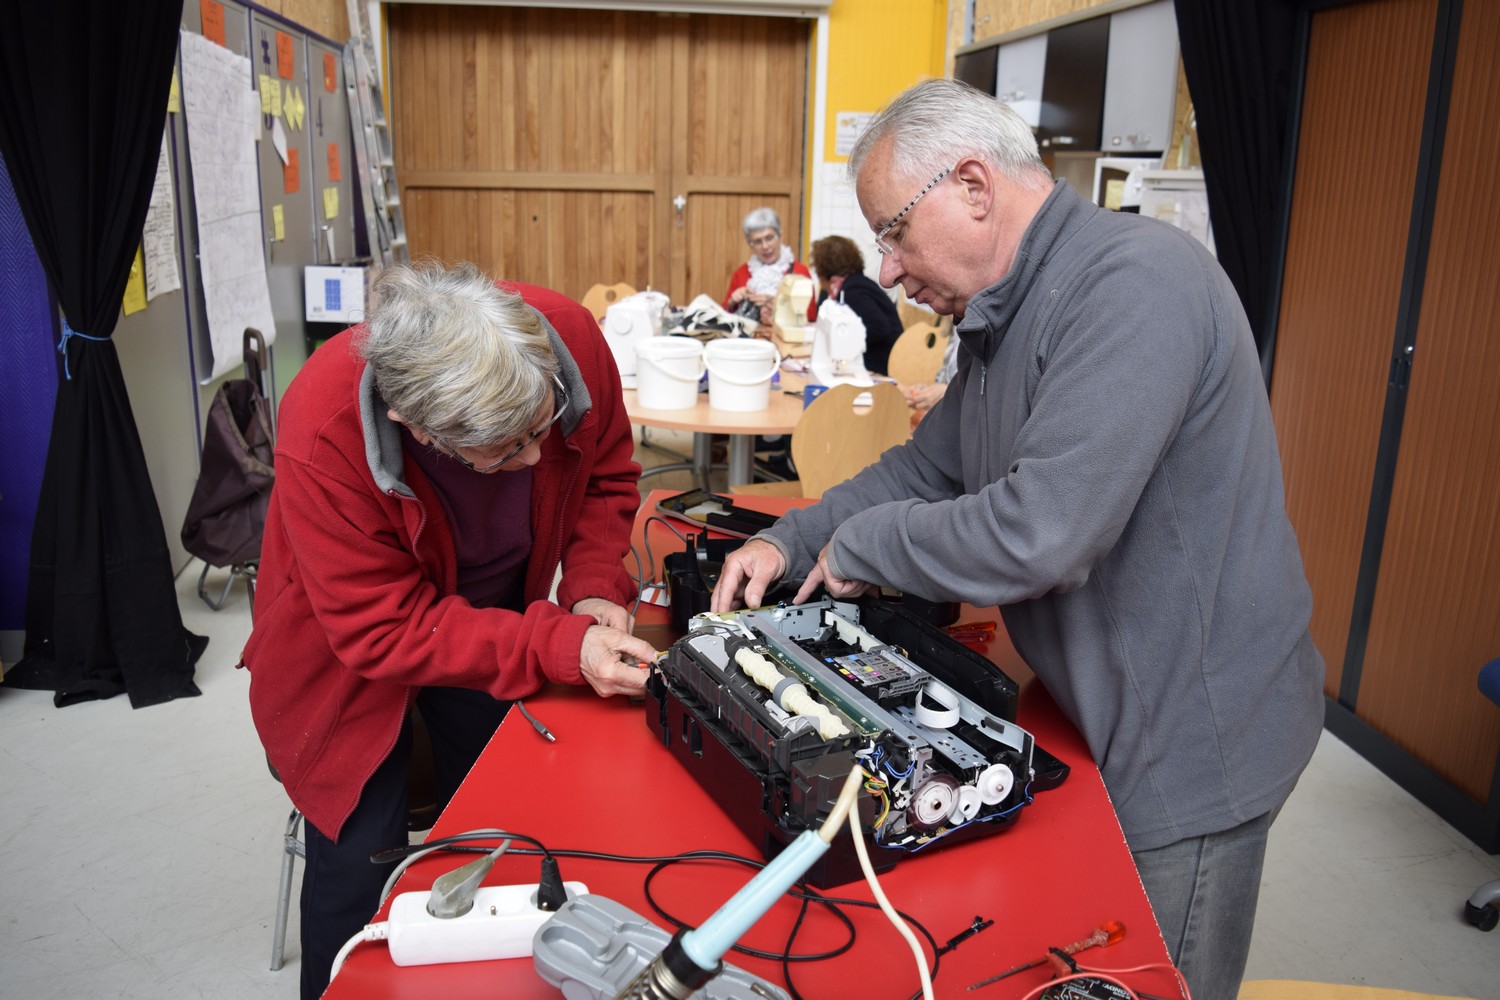 You are currently viewing [Bilan] Repair Café du 8 avril 2017